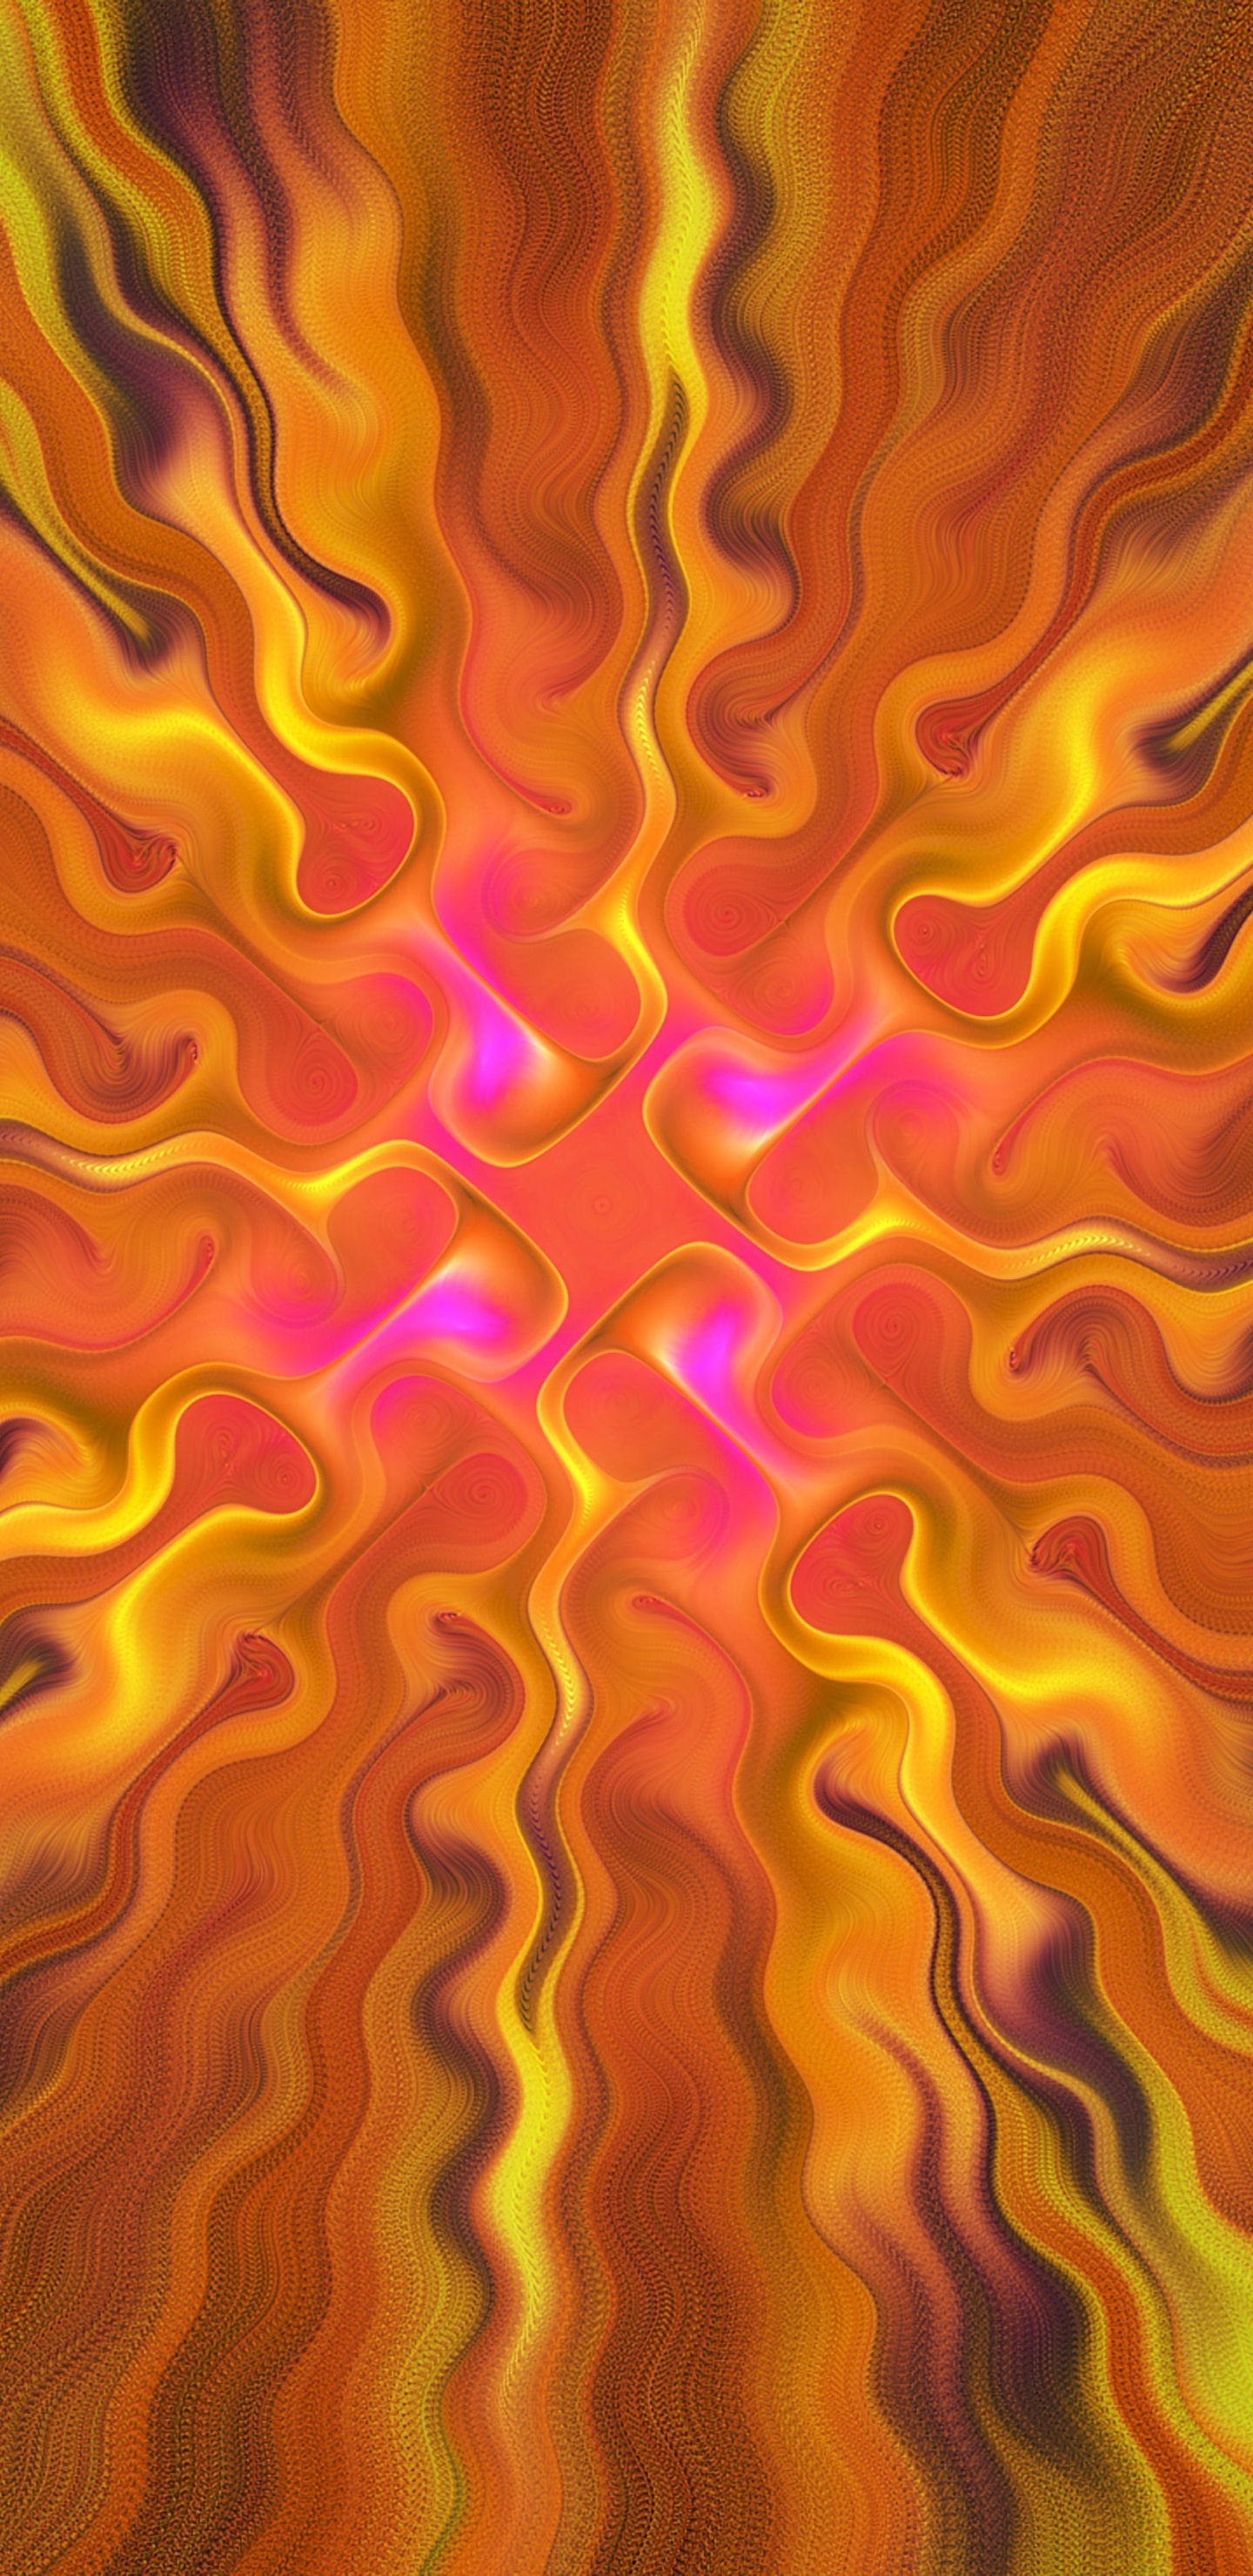 Orange and Yellow Abstract Painting. Wallpaper in 1440x2960 Resolution